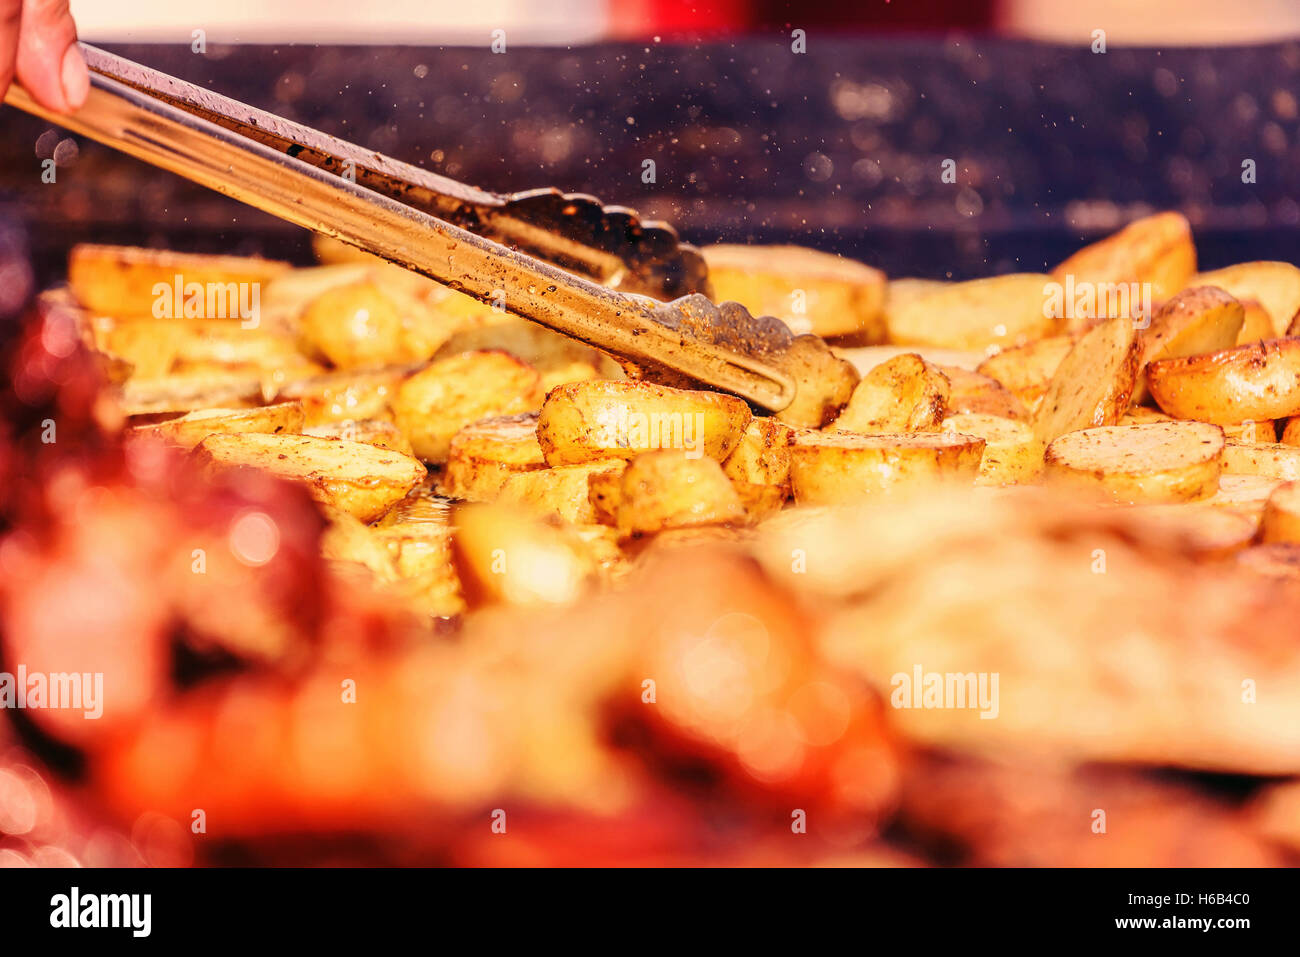 Preparing Grilled Potatoes On Barbecue Stock Photo